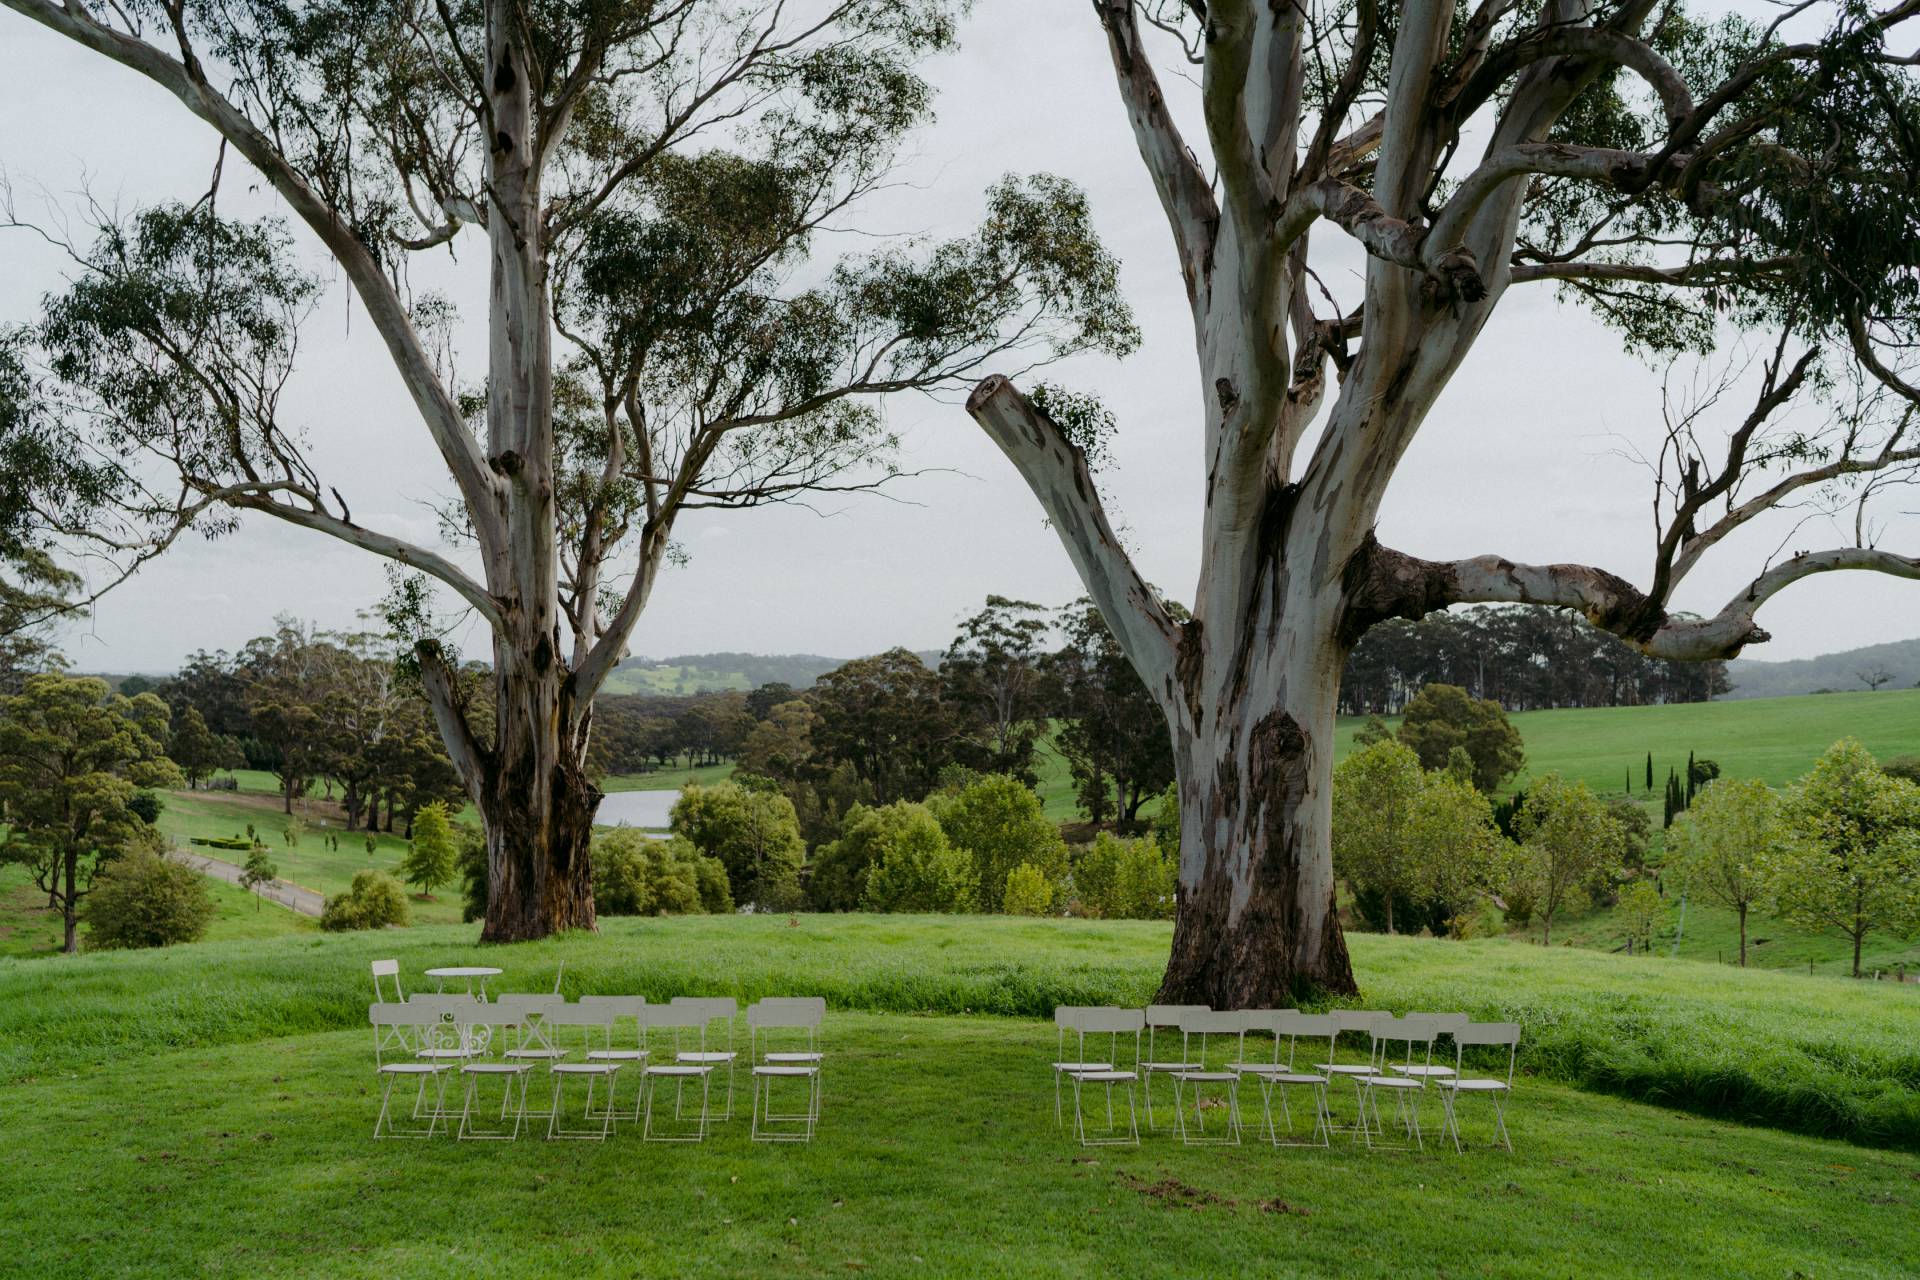 Empty white chairs arranged for a wedding ceremony in a grassy field with towering gumtrees and a scenic landscape backdrop